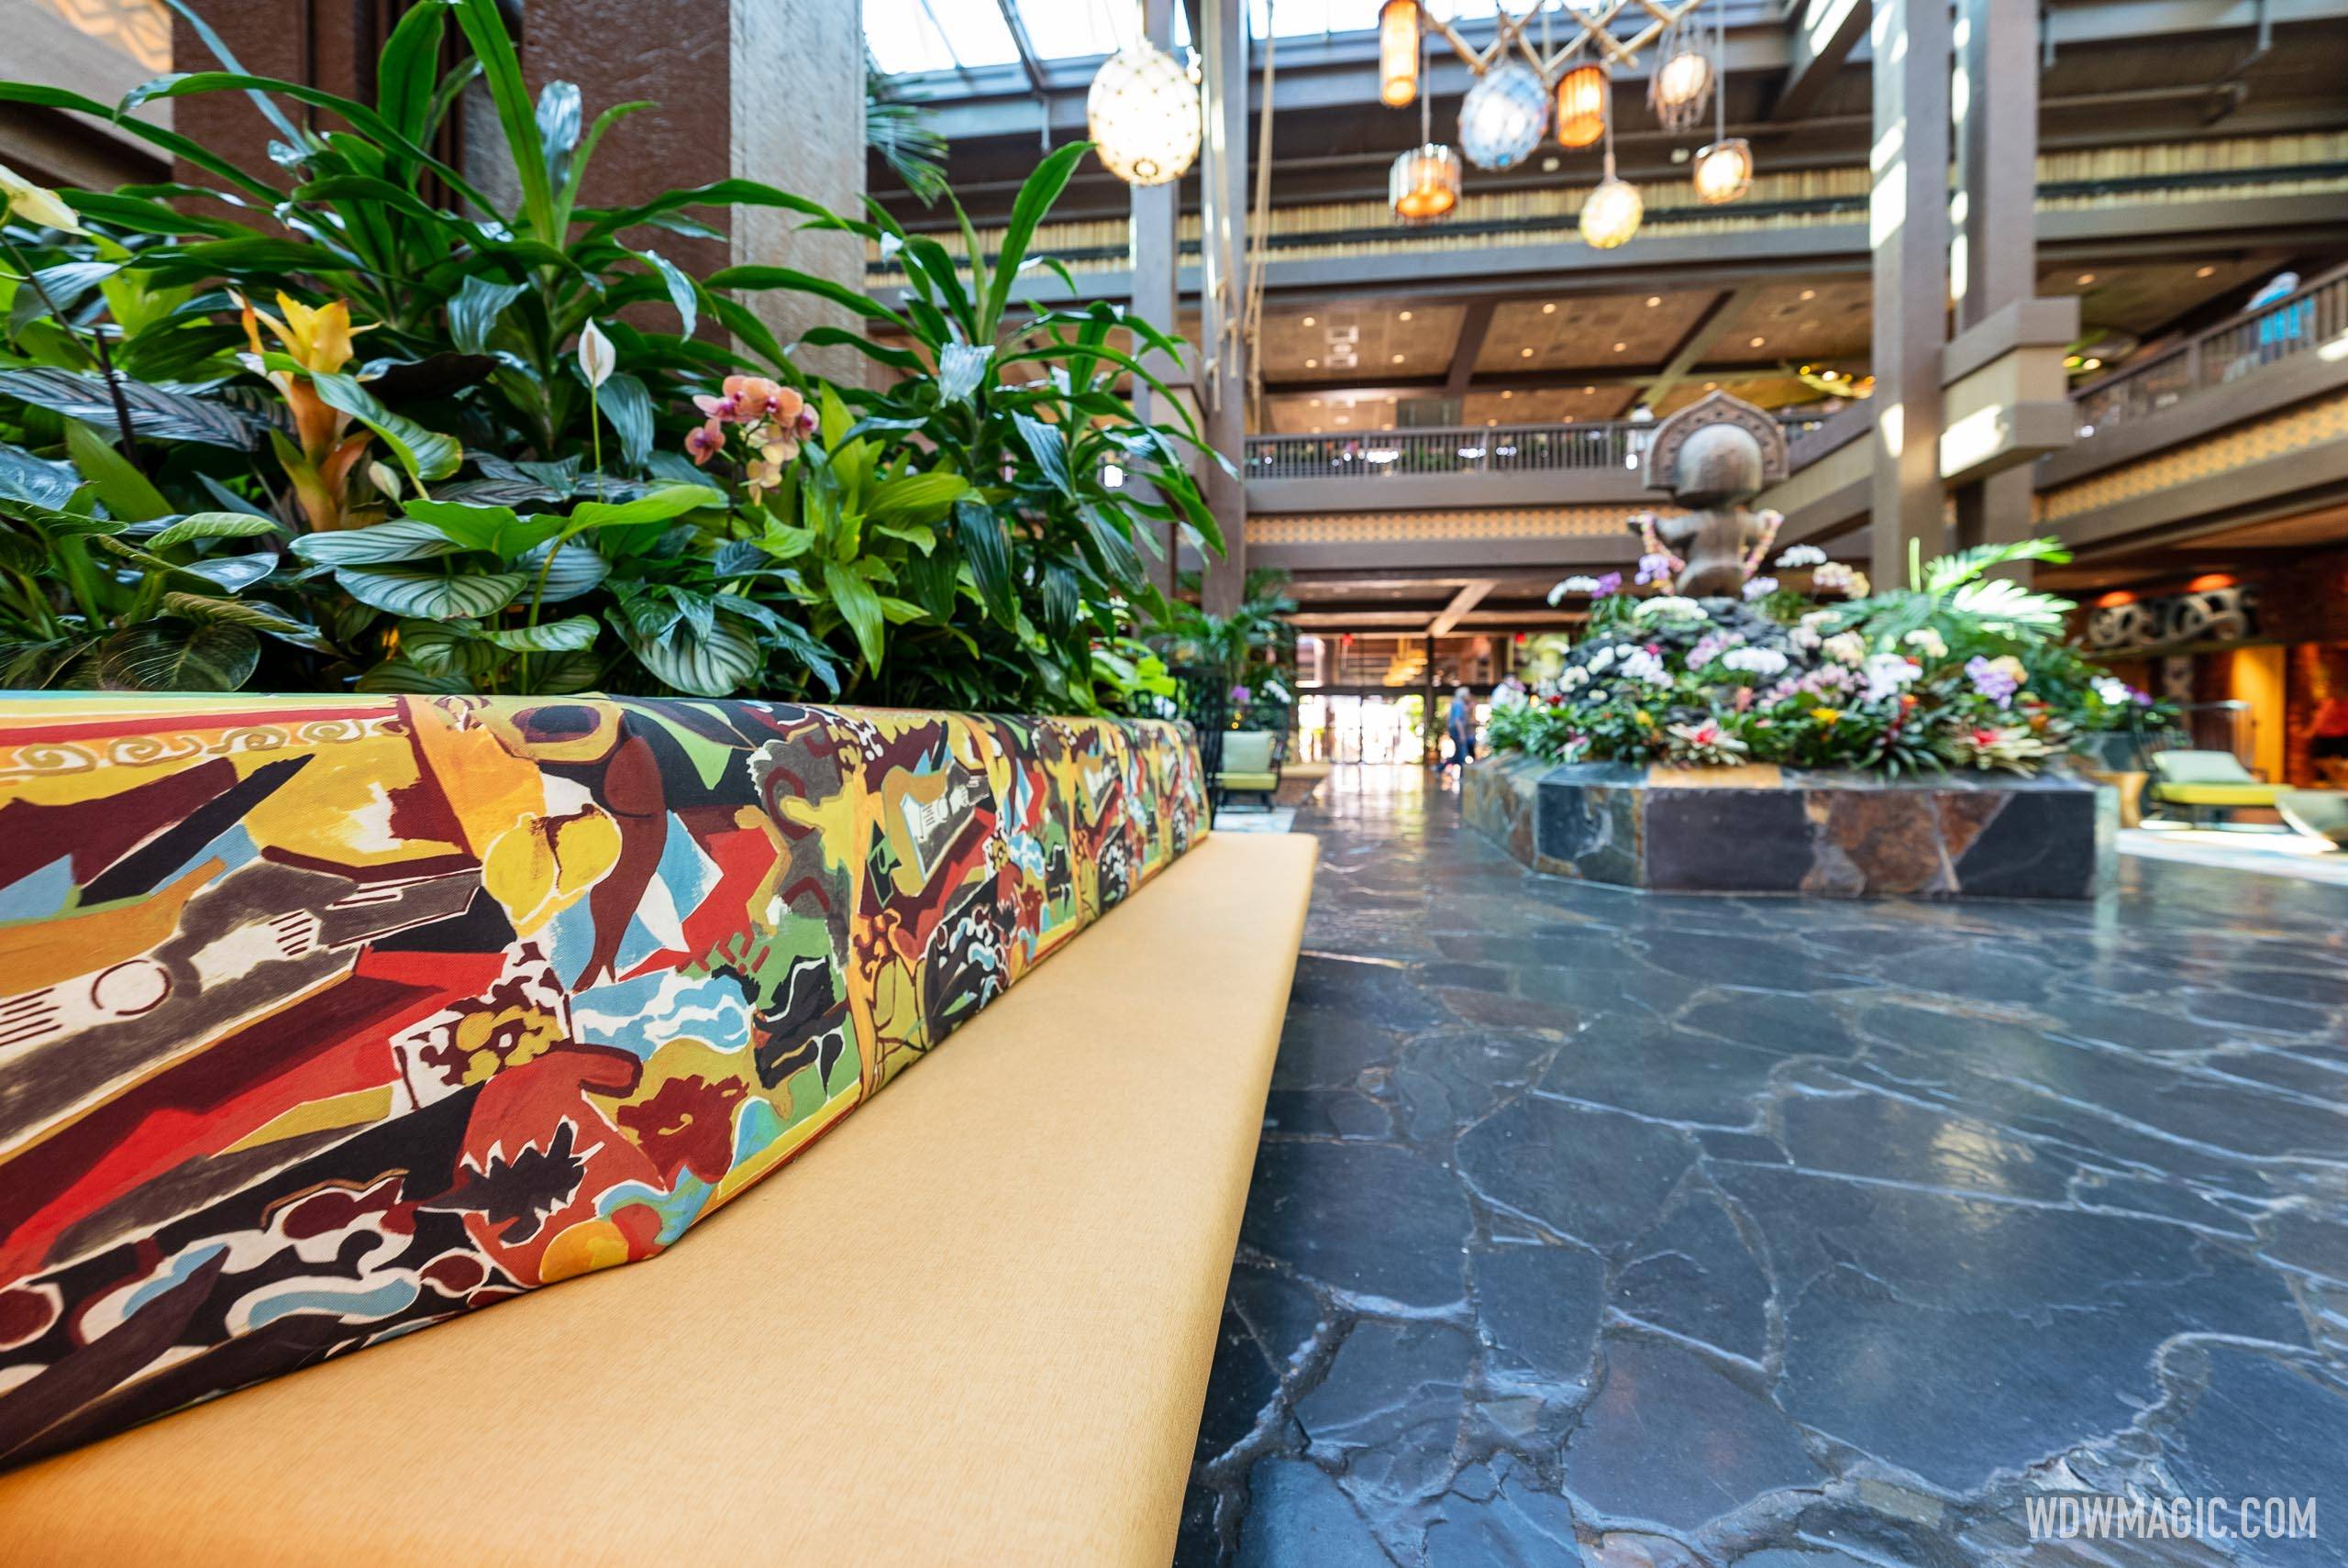 More colorful updates come to the lobby at Disney's Polynesian Village Resort